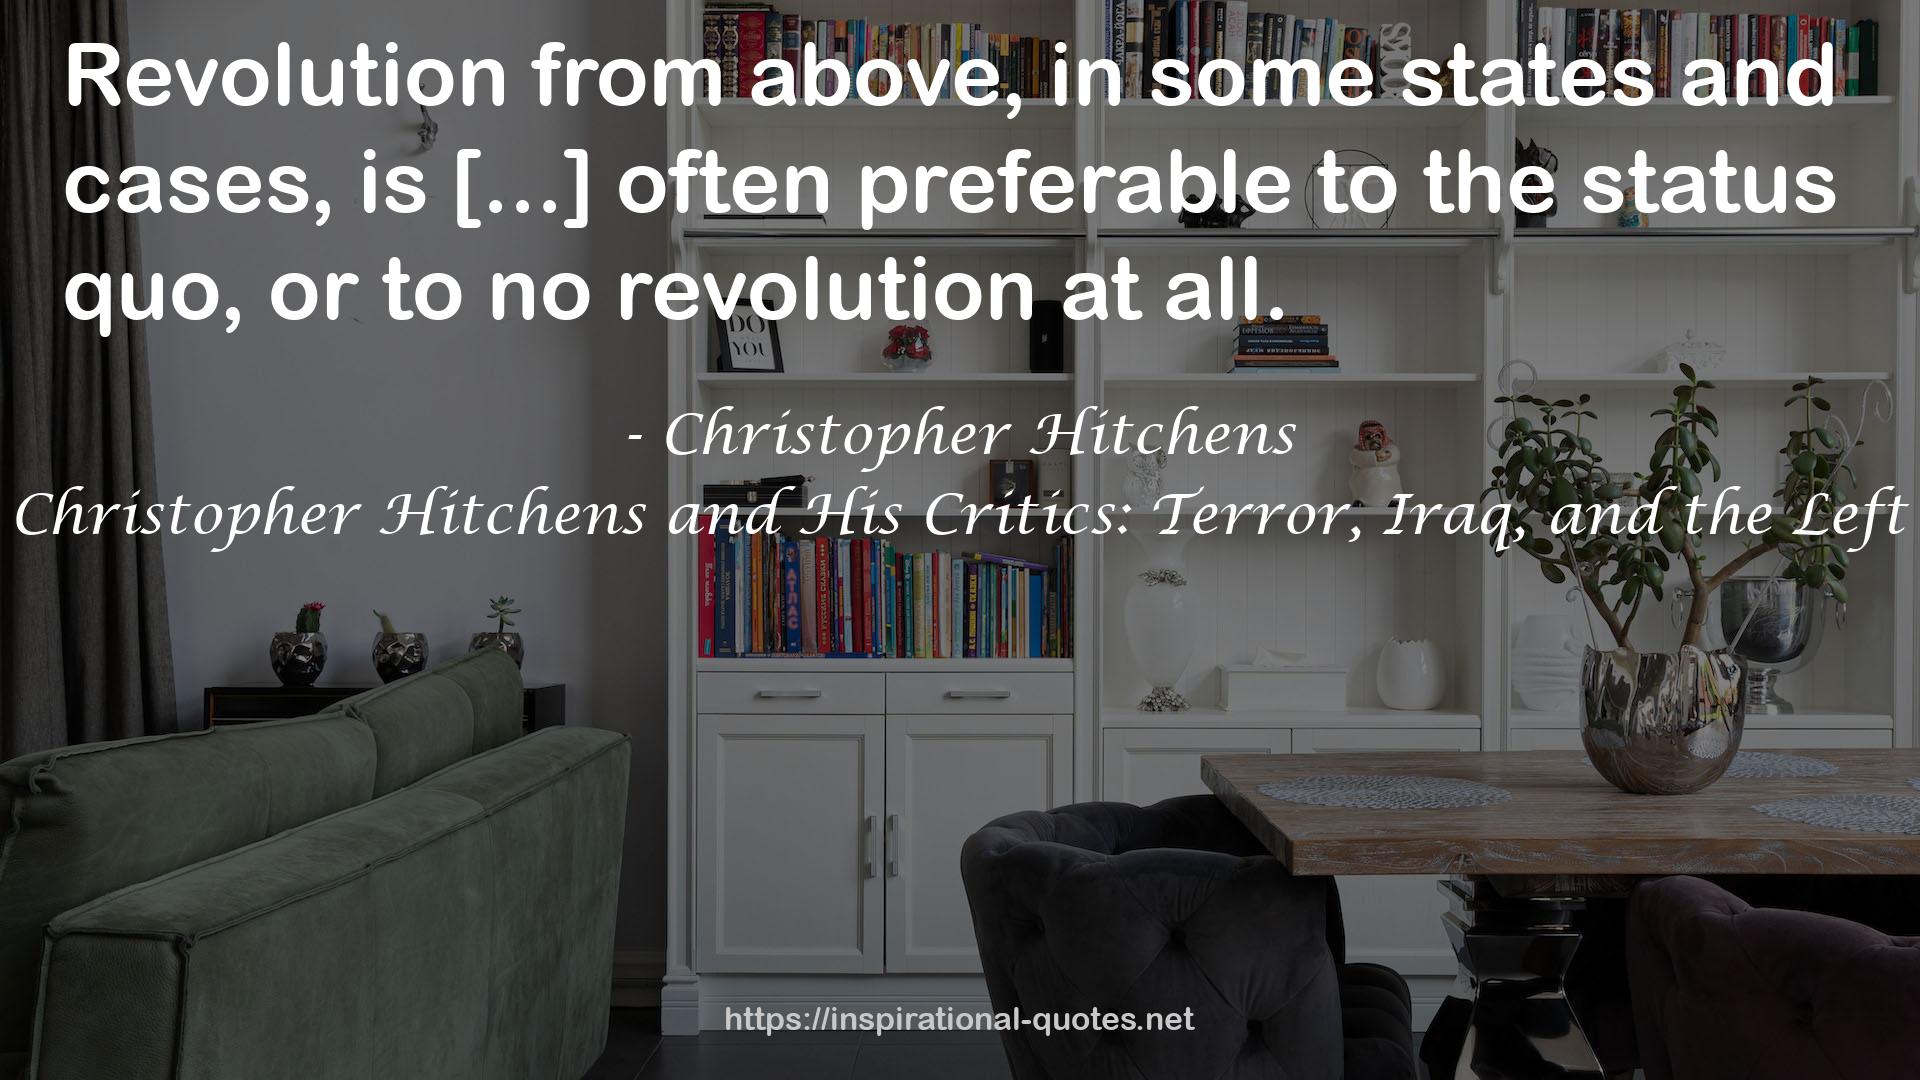 Christopher Hitchens and His Critics: Terror, Iraq, and the Left QUOTES